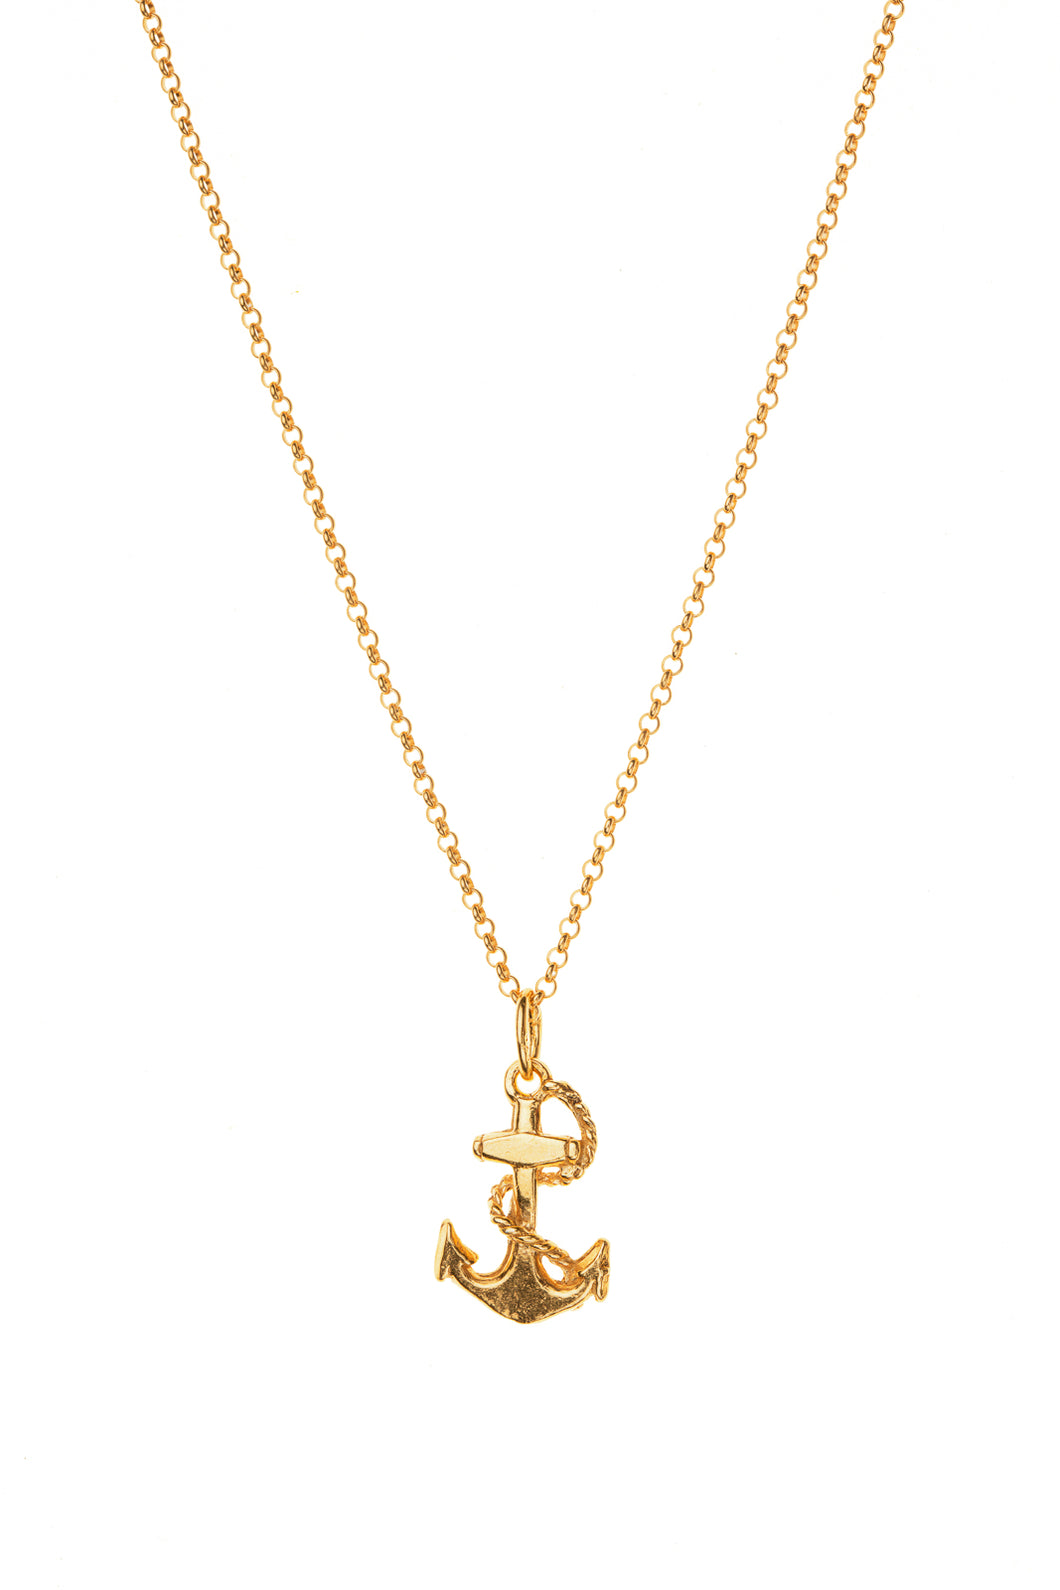 Gold Anchor Charm Necklace